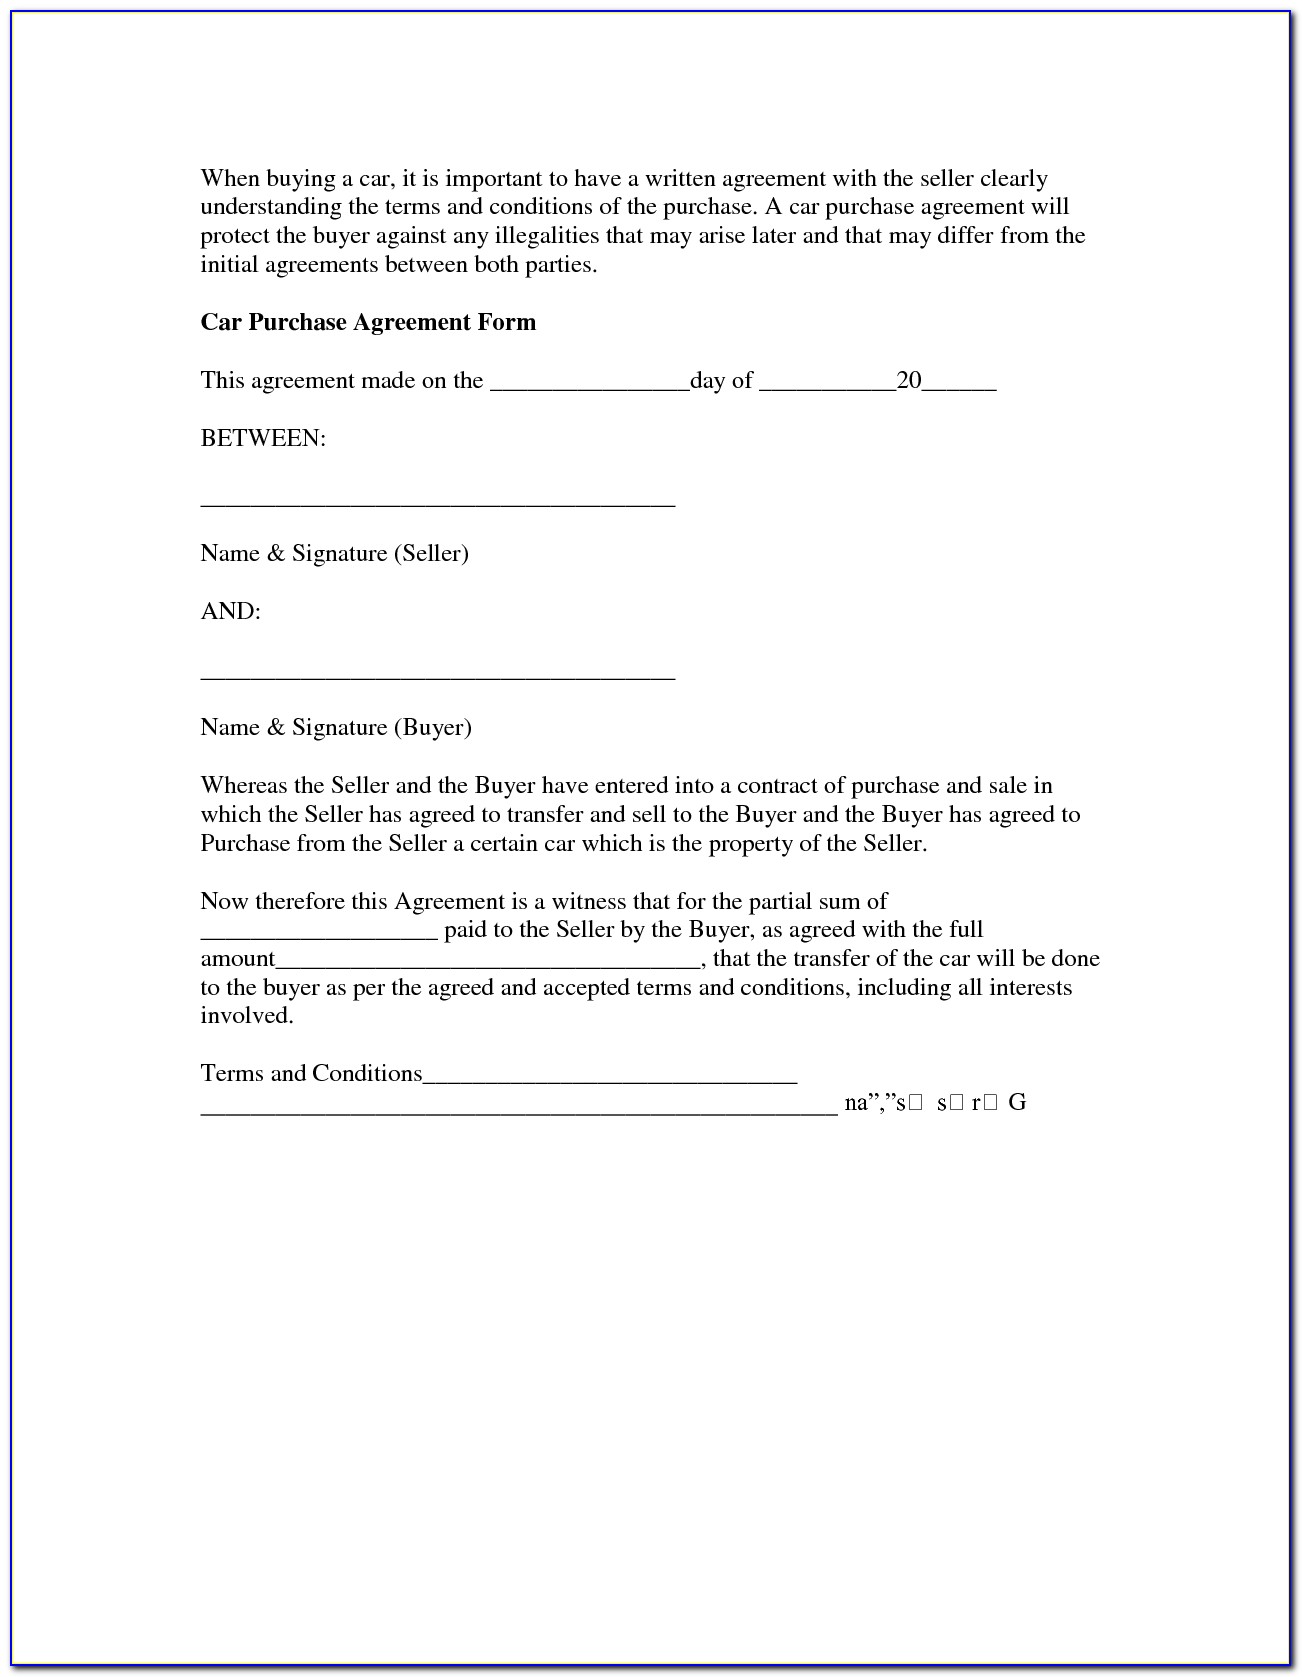 Car Purchase Agreement Form Pdf